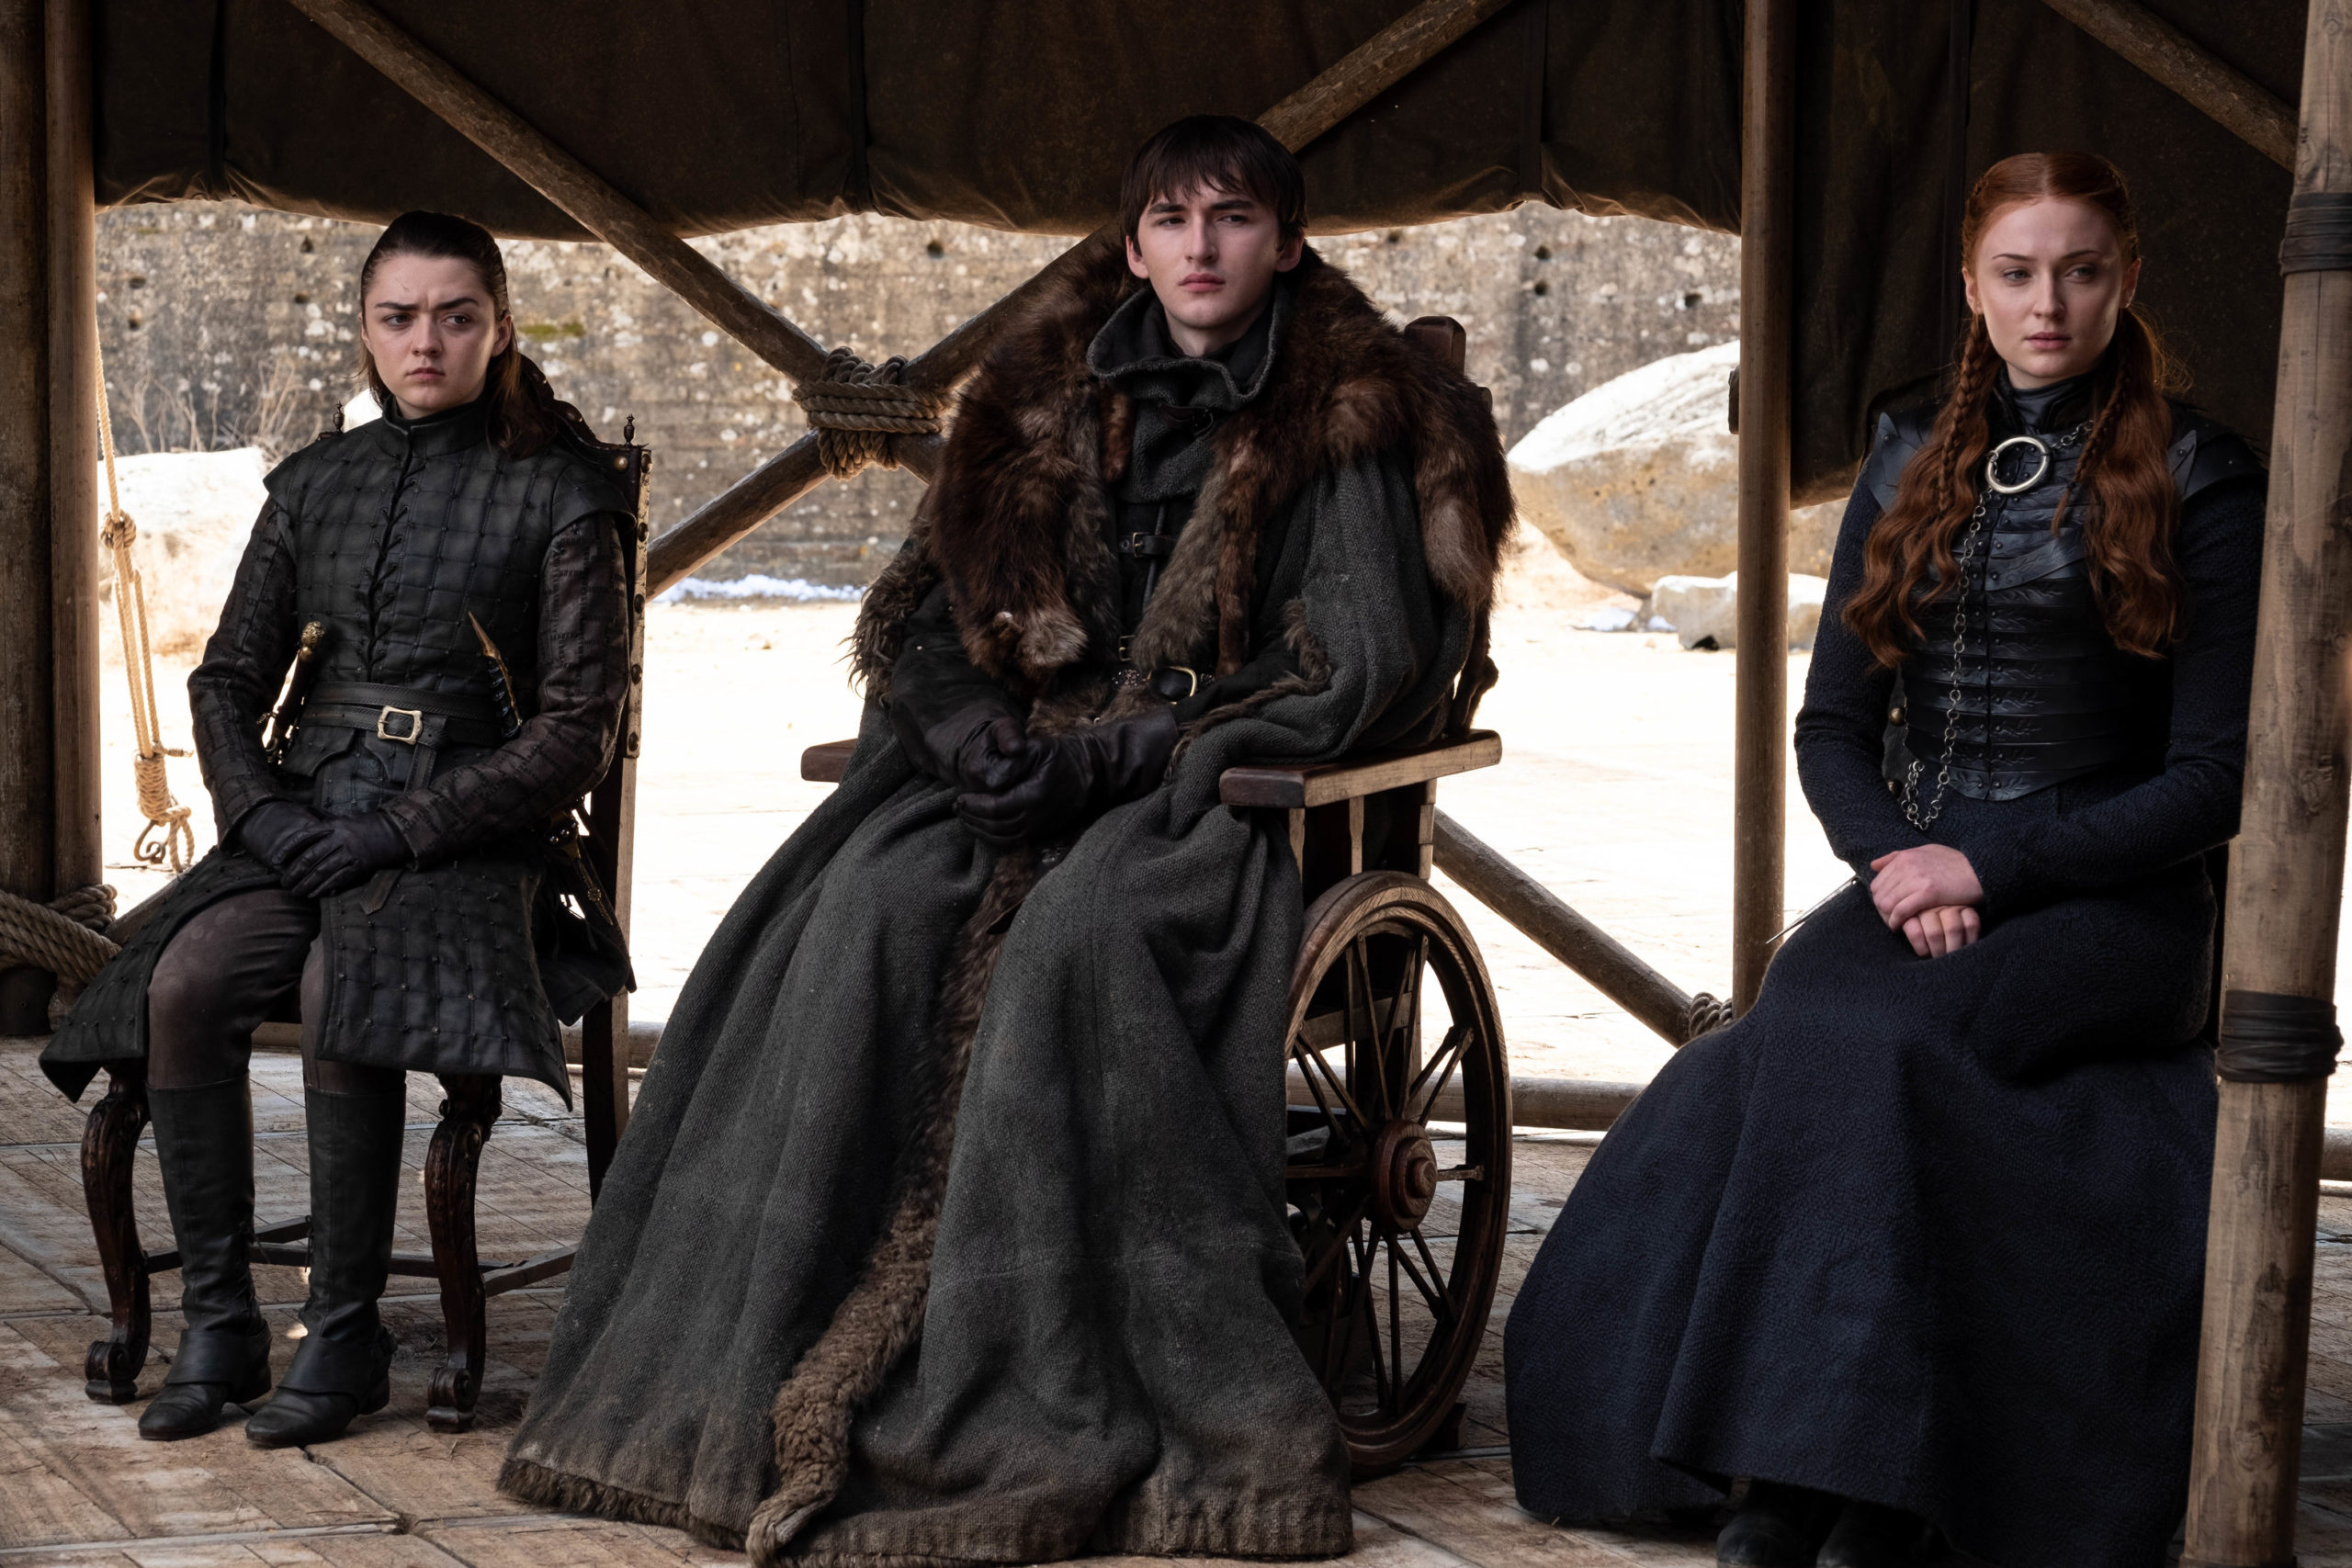 Arya (left), Bran, and Sansa (right) sit in a row at the meeting to decide who will rule the Seven Kingdoms at the end of Game of Thrones.